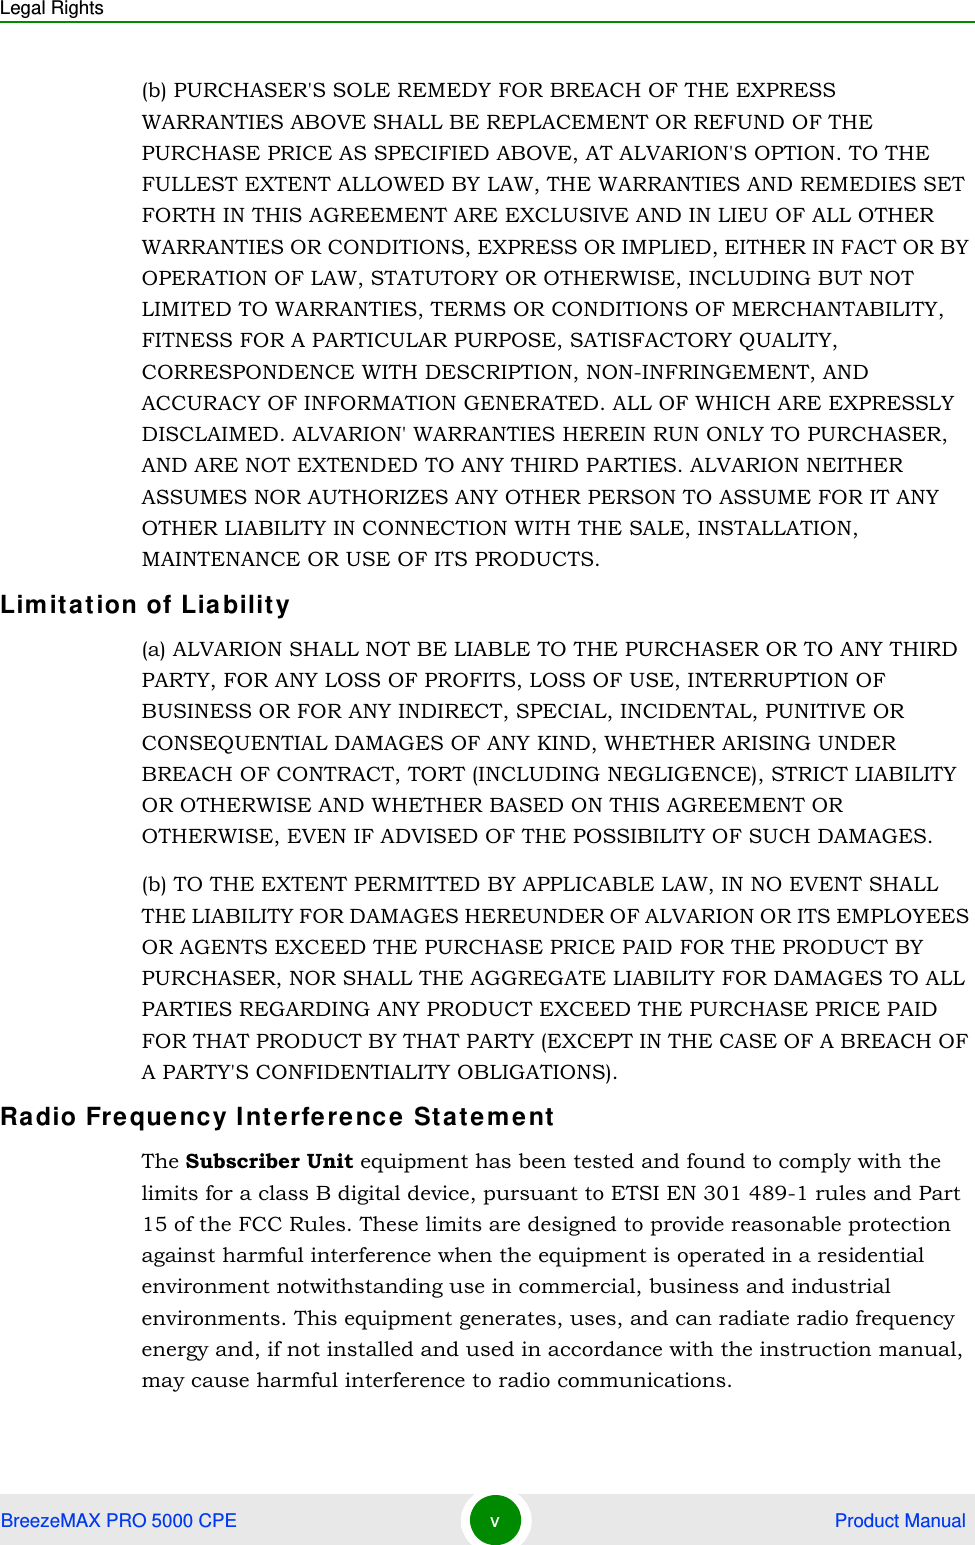 Legal RightsBreezeMAX PRO 5000 CPE v Product Manual(b) PURCHASER&apos;S SOLE REMEDY FOR BREACH OF THE EXPRESS WARRANTIES ABOVE SHALL BE REPLACEMENT OR REFUND OF THE PURCHASE PRICE AS SPECIFIED ABOVE, AT ALVARION&apos;S OPTION. TO THE FULLEST EXTENT ALLOWED BY LAW, THE WARRANTIES AND REMEDIES SET FORTH IN THIS AGREEMENT ARE EXCLUSIVE AND IN LIEU OF ALL OTHER WARRANTIES OR CONDITIONS, EXPRESS OR IMPLIED, EITHER IN FACT OR BY OPERATION OF LAW, STATUTORY OR OTHERWISE, INCLUDING BUT NOT LIMITED TO WARRANTIES, TERMS OR CONDITIONS OF MERCHANTABILITY, FITNESS FOR A PARTICULAR PURPOSE, SATISFACTORY QUALITY, CORRESPONDENCE WITH DESCRIPTION, NON-INFRINGEMENT, AND ACCURACY OF INFORMATION GENERATED. ALL OF WHICH ARE EXPRESSLY DISCLAIMED. ALVARION&apos; WARRANTIES HEREIN RUN ONLY TO PURCHASER, AND ARE NOT EXTENDED TO ANY THIRD PARTIES. ALVARION NEITHER ASSUMES NOR AUTHORIZES ANY OTHER PERSON TO ASSUME FOR IT ANY OTHER LIABILITY IN CONNECTION WITH THE SALE, INSTALLATION, MAINTENANCE OR USE OF ITS PRODUCTS.Limitation of Liability(a) ALVARION SHALL NOT BE LIABLE TO THE PURCHASER OR TO ANY THIRD PARTY, FOR ANY LOSS OF PROFITS, LOSS OF USE, INTERRUPTION OF BUSINESS OR FOR ANY INDIRECT, SPECIAL, INCIDENTAL, PUNITIVE OR CONSEQUENTIAL DAMAGES OF ANY KIND, WHETHER ARISING UNDER BREACH OF CONTRACT, TORT (INCLUDING NEGLIGENCE), STRICT LIABILITY OR OTHERWISE AND WHETHER BASED ON THIS AGREEMENT OR OTHERWISE, EVEN IF ADVISED OF THE POSSIBILITY OF SUCH DAMAGES.(b) TO THE EXTENT PERMITTED BY APPLICABLE LAW, IN NO EVENT SHALL THE LIABILITY FOR DAMAGES HEREUNDER OF ALVARION OR ITS EMPLOYEES OR AGENTS EXCEED THE PURCHASE PRICE PAID FOR THE PRODUCT BY PURCHASER, NOR SHALL THE AGGREGATE LIABILITY FOR DAMAGES TO ALL PARTIES REGARDING ANY PRODUCT EXCEED THE PURCHASE PRICE PAID FOR THAT PRODUCT BY THAT PARTY (EXCEPT IN THE CASE OF A BREACH OF A PARTY&apos;S CONFIDENTIALITY OBLIGATIONS).Radio Frequency Interference StatementThe Subscriber Unit equipment has been tested and found to comply with the limits for a class B digital device, pursuant to ETSI EN 301 489-1 rules and Part 15 of the FCC Rules. These limits are designed to provide reasonable protection against harmful interference when the equipment is operated in a residential environment notwithstanding use in commercial, business and industrial environments. This equipment generates, uses, and can radiate radio frequency energy and, if not installed and used in accordance with the instruction manual, may cause harmful interference to radio communications.